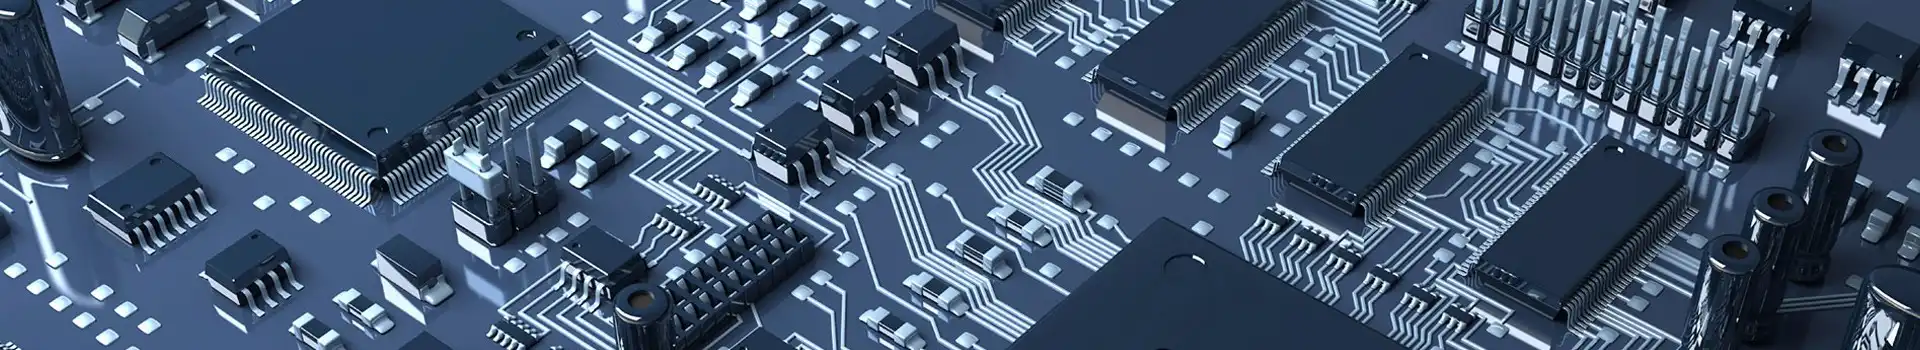 Internet of things PCB design skills and professional knowledge requirements.